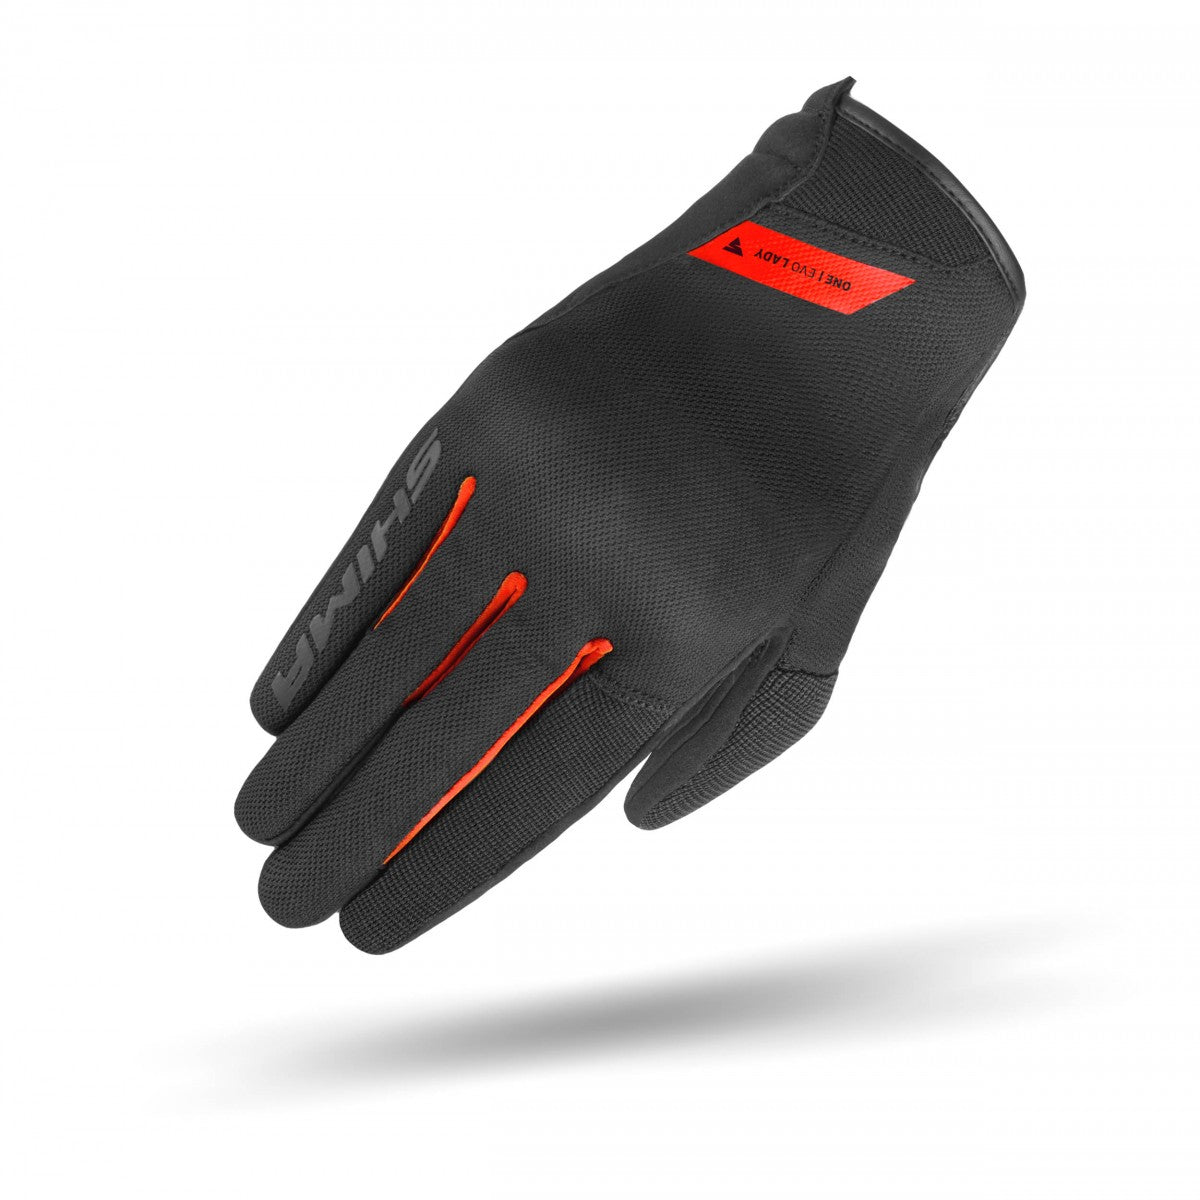 ONE EVO LADY MOTORCYCLE LADY GLOVE IN BLACK AND RED DETAILS 